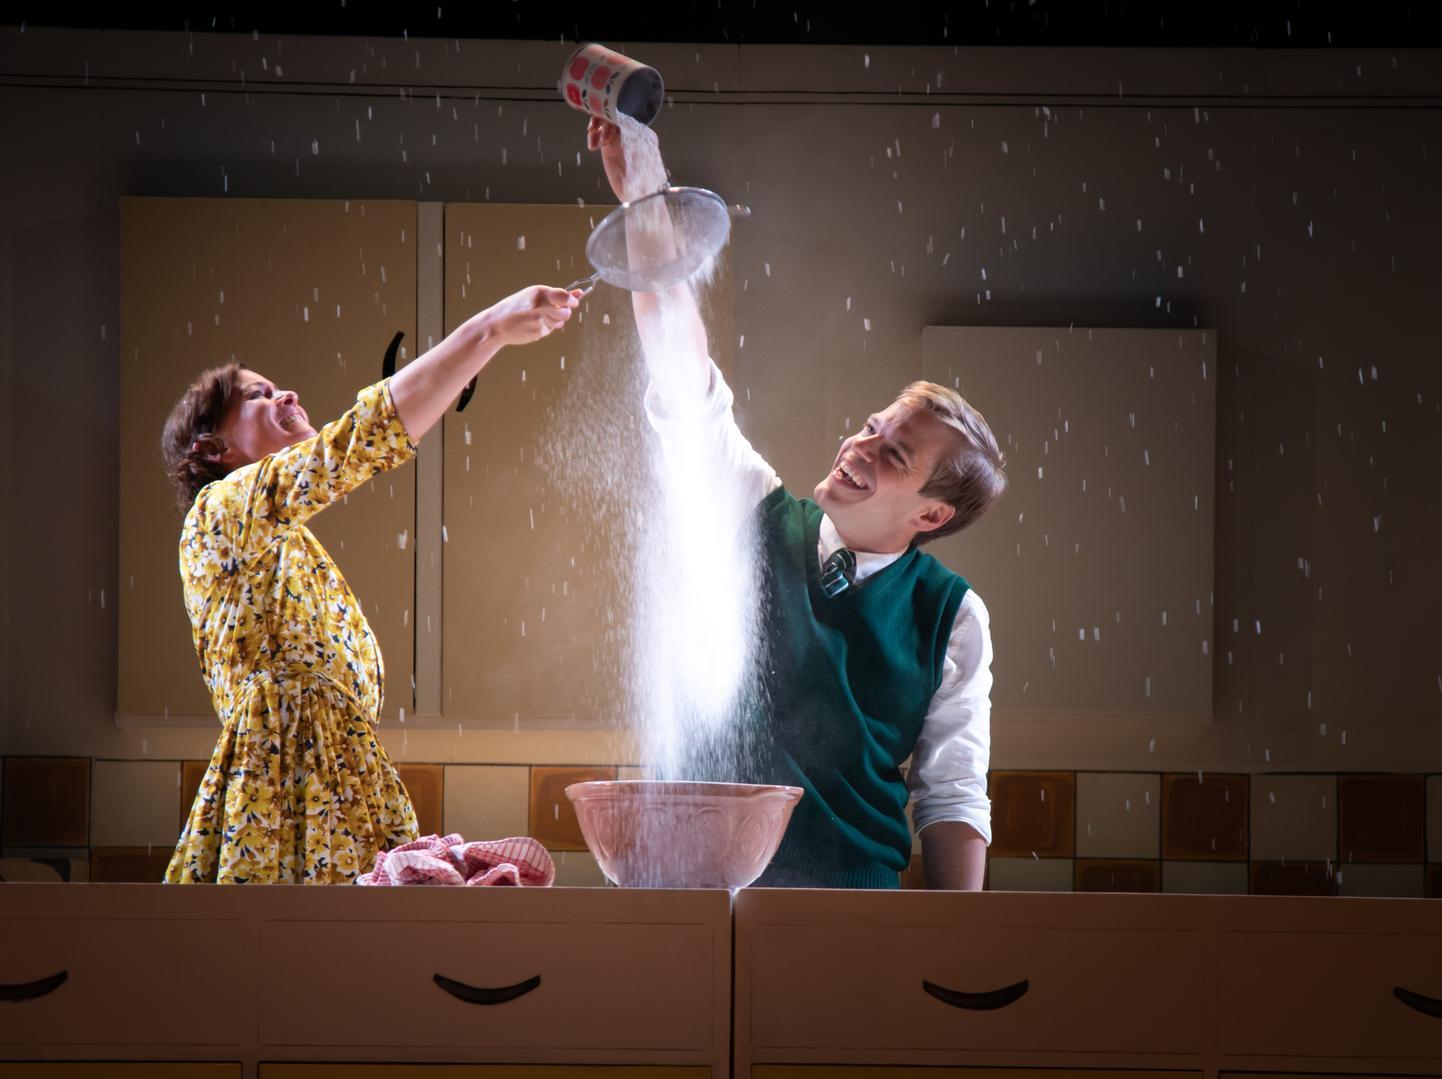 Flour power! Katy Federman and Giles Cooper in Toast.